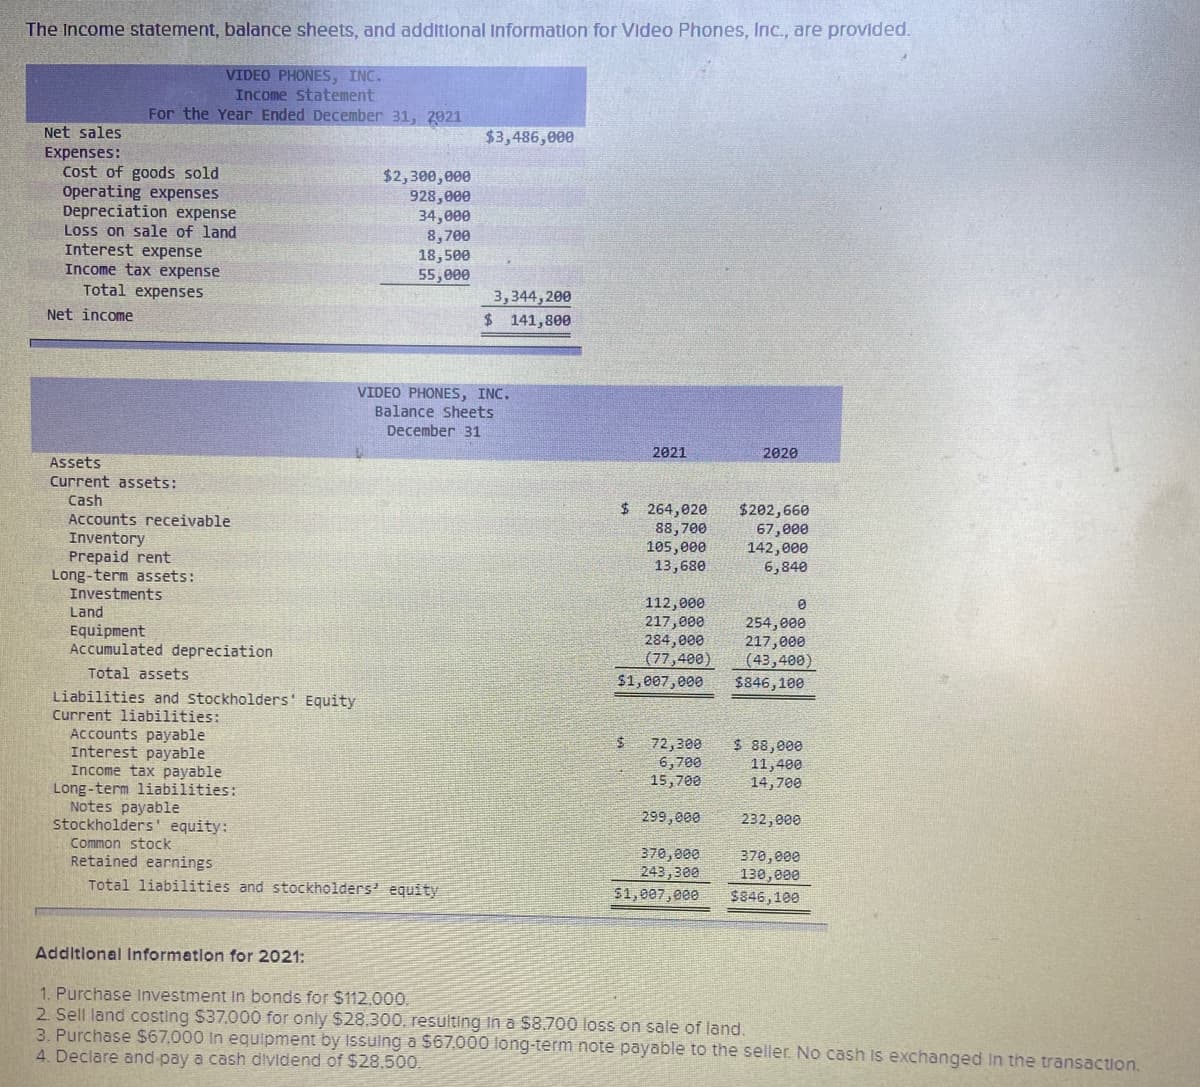 The Income statement, balance sheets, and additional Information for Video Phones, Inc., are provided.
VIDEO PHONES, INC.
Income Statement
For the Year Ended December 31, 2921
Net sales
$3,486,000
Expenses:
Cost of goods sold
Operating expenses
Depreciation expense
Loss on sale of land
Interest expense
Income tax expense
Total expenses
$2,300,000
928,000
34,000
8,700
18,500
55,000
3,344,200
$ 141,800
Net income
VIDEO PHONES, INC.
Balance Sheets
December 31
2021
2020
ssets
Current assets:
Cash
Accounts receivable
$ 264,020
Inventory
Prepaid rent
Long-term assets:
Investments
88,700
105,000
13,680
$202,660
67,000
142,000
6,840
Land
Equipment
Accumulated depreciation
112,000
217,000
284,000
(77,400)
254,000
217,000
(43,400)
$846,100
Total assets
$1,007,000
Liabilities and Stockholders' Equity
Current liabilities:
Accounts payable
Interest payable
Income tax payable
Long -term liabilities:
Notes payable
Stockholders' equity:
Common stock
Retained earnings
72,300
6,700
$ 88,000
11,400
14,700
15,700
299,000
232,000
370,000
243,300
$1,007,000
370,000
130,000
Total liabilities and stockholders' equity
$846,100
Additional Information for 2021:
1. Purchase Investment In bonds for $112,000.
2 Sell land costing $37,000 for only $28.300, resuiting In a $8.700 loss on sale of land.
3. Purchase $67,000 In equipment by Isulng a $67,000 long-term note payable to the seller. No cash is exchanged In the transaction.
4. Declare and pay a cash dividend of $28,500.
